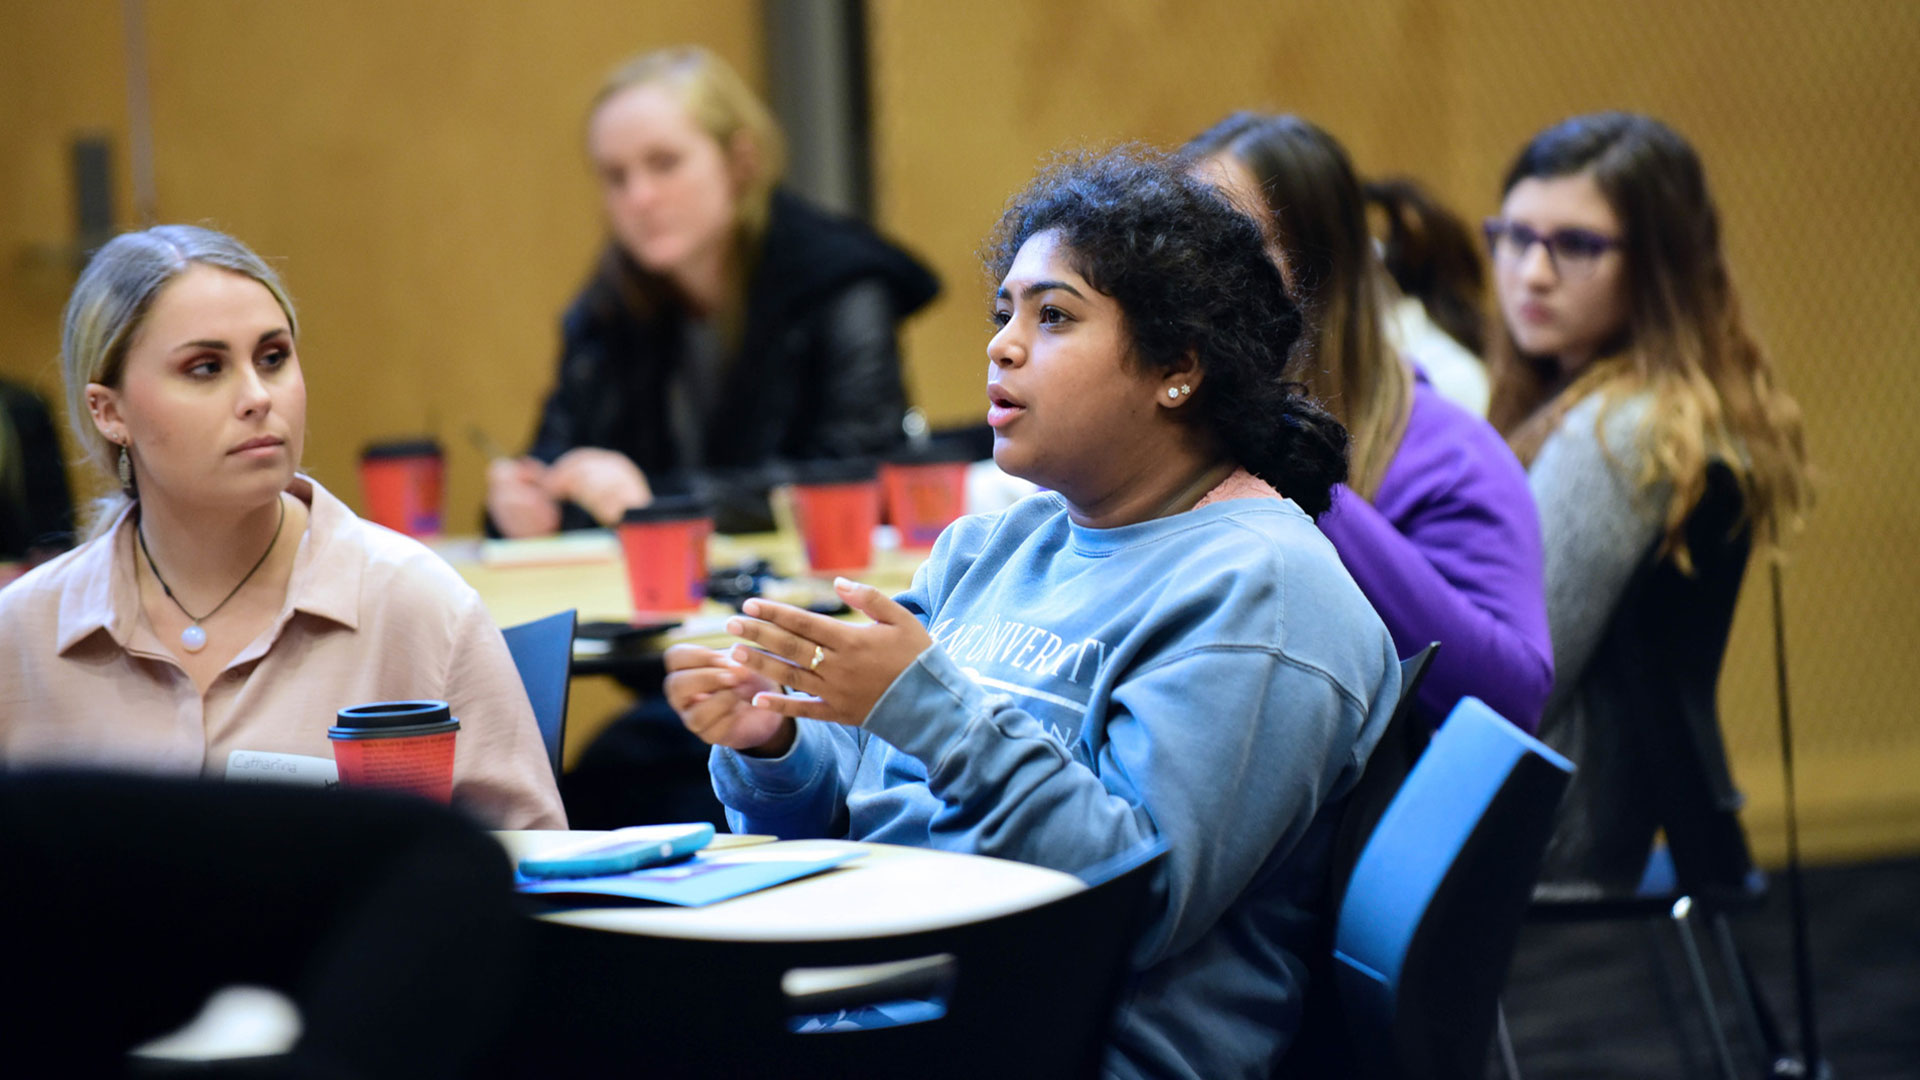 Students engage in forum discussion